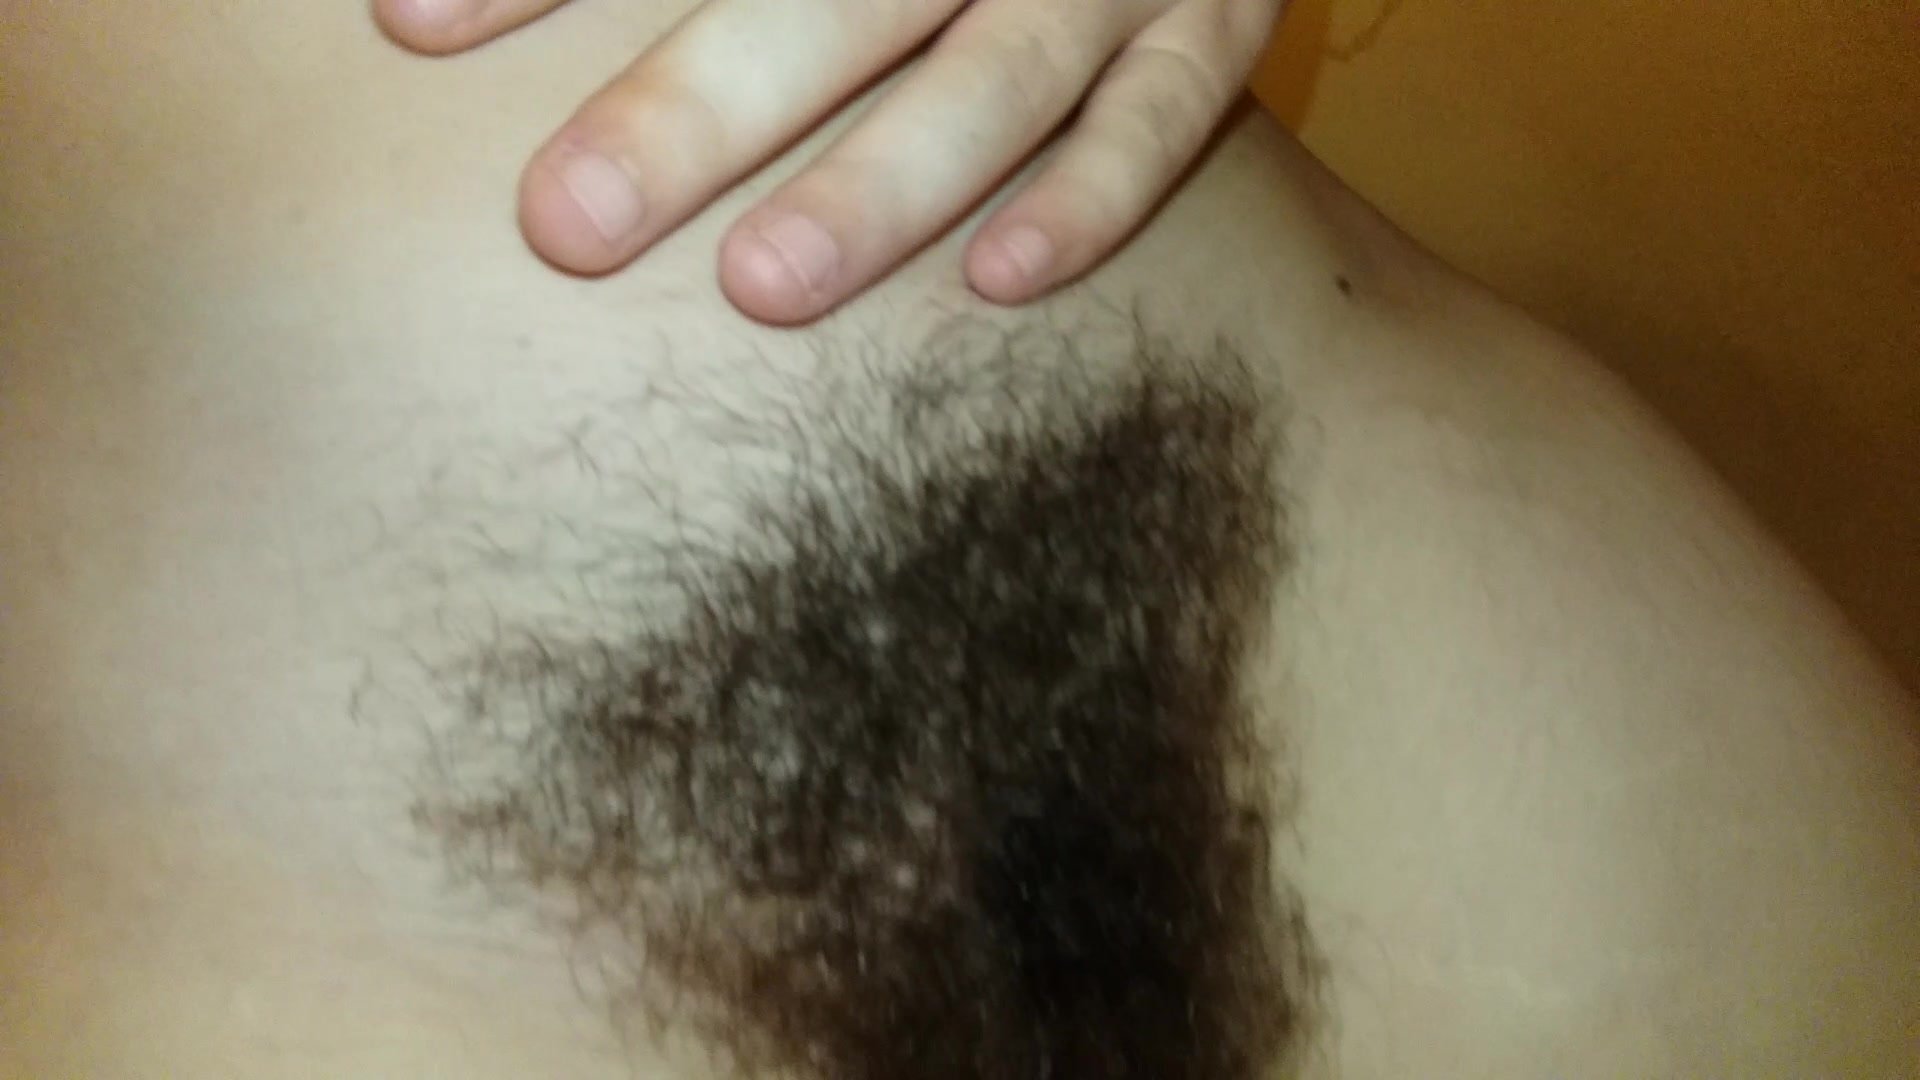 Tits and hairy pussy